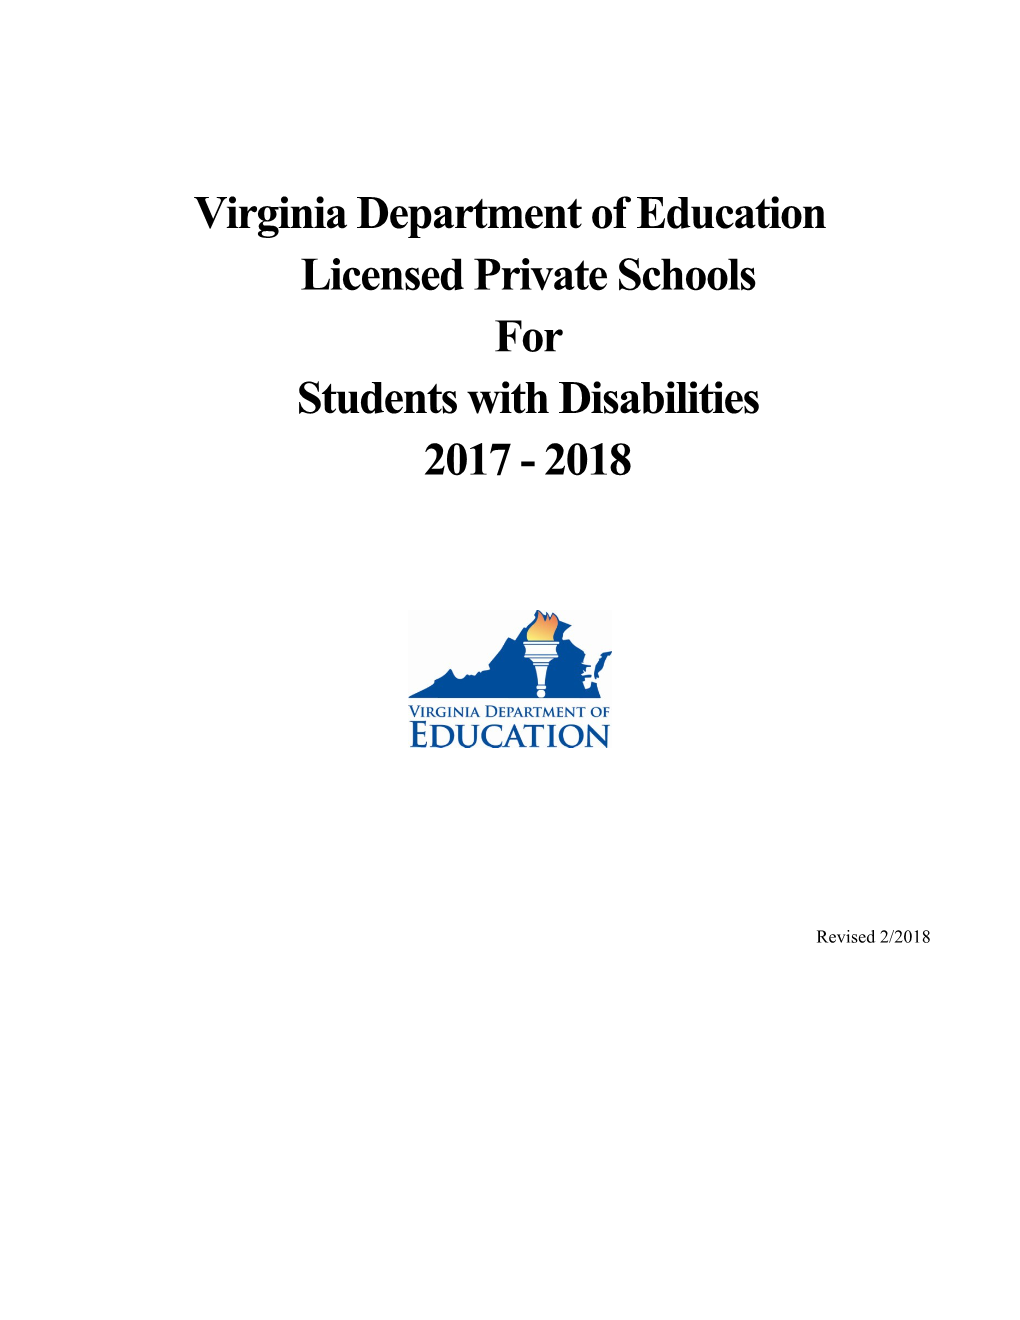 Virginia Department of Education X000d Licensed Private Schools X000d for X000d Students